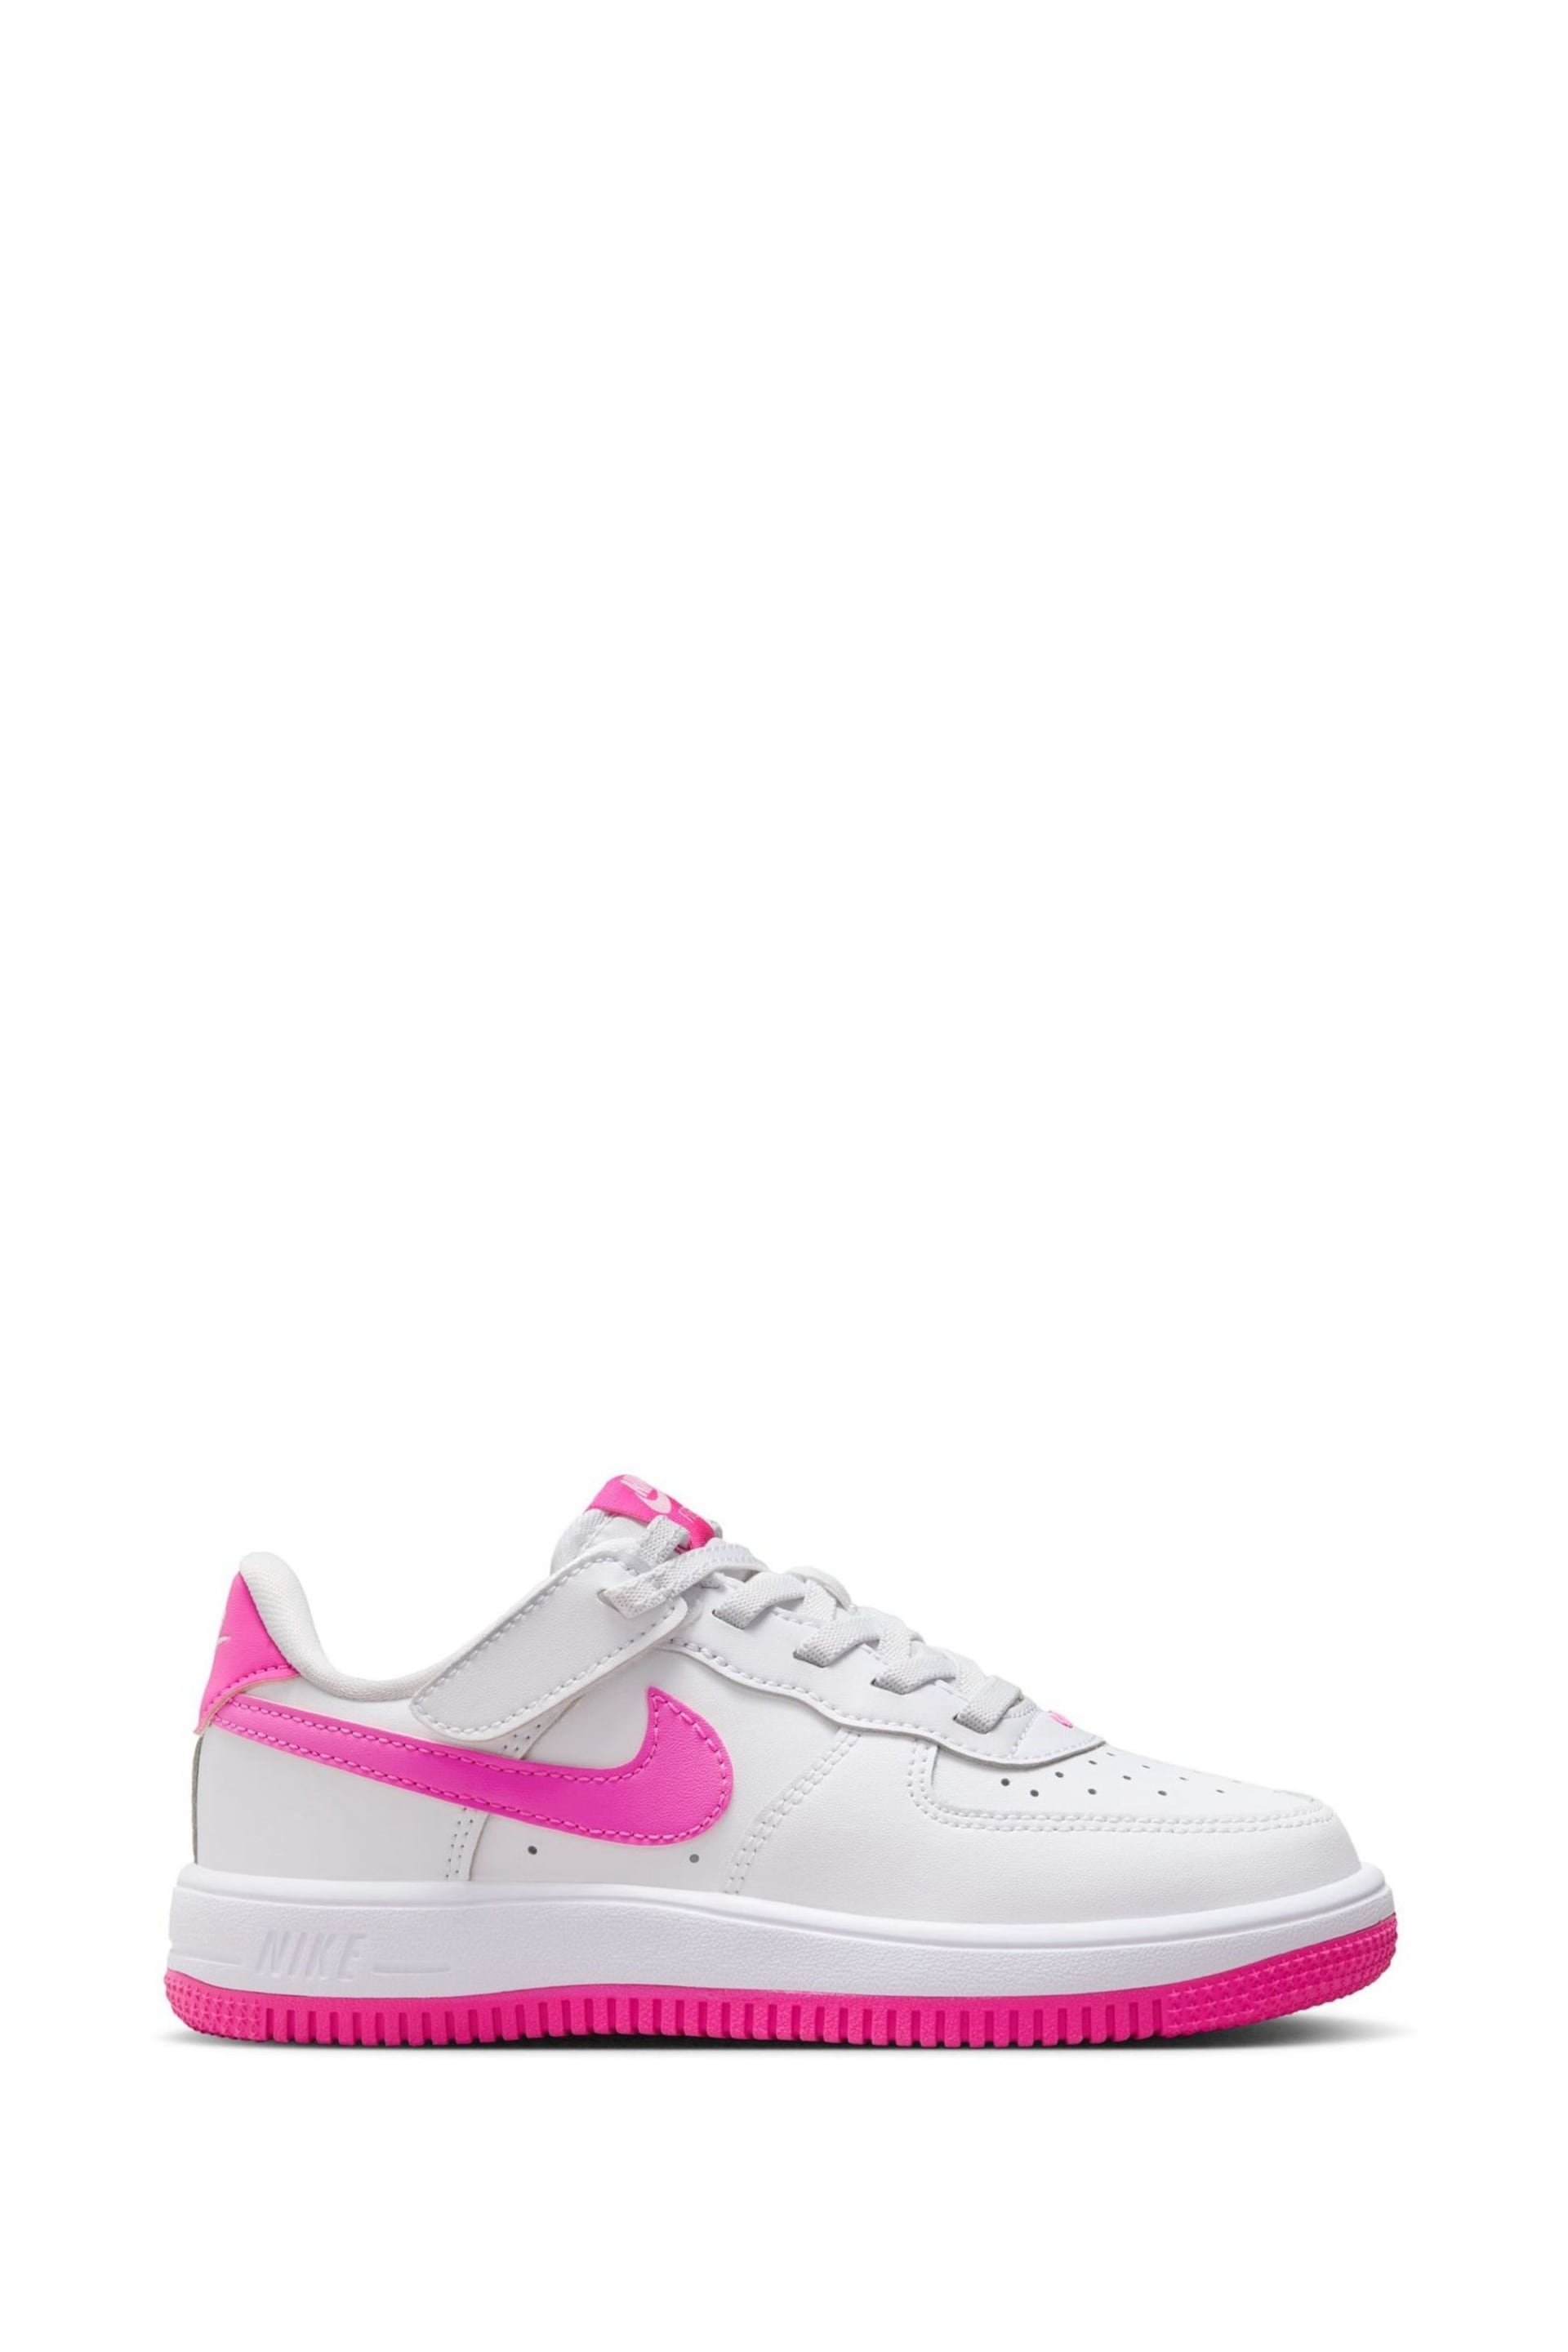 Nike White/Pink Junior Force 1 Low Easy On Trainers - Image 1 of 1